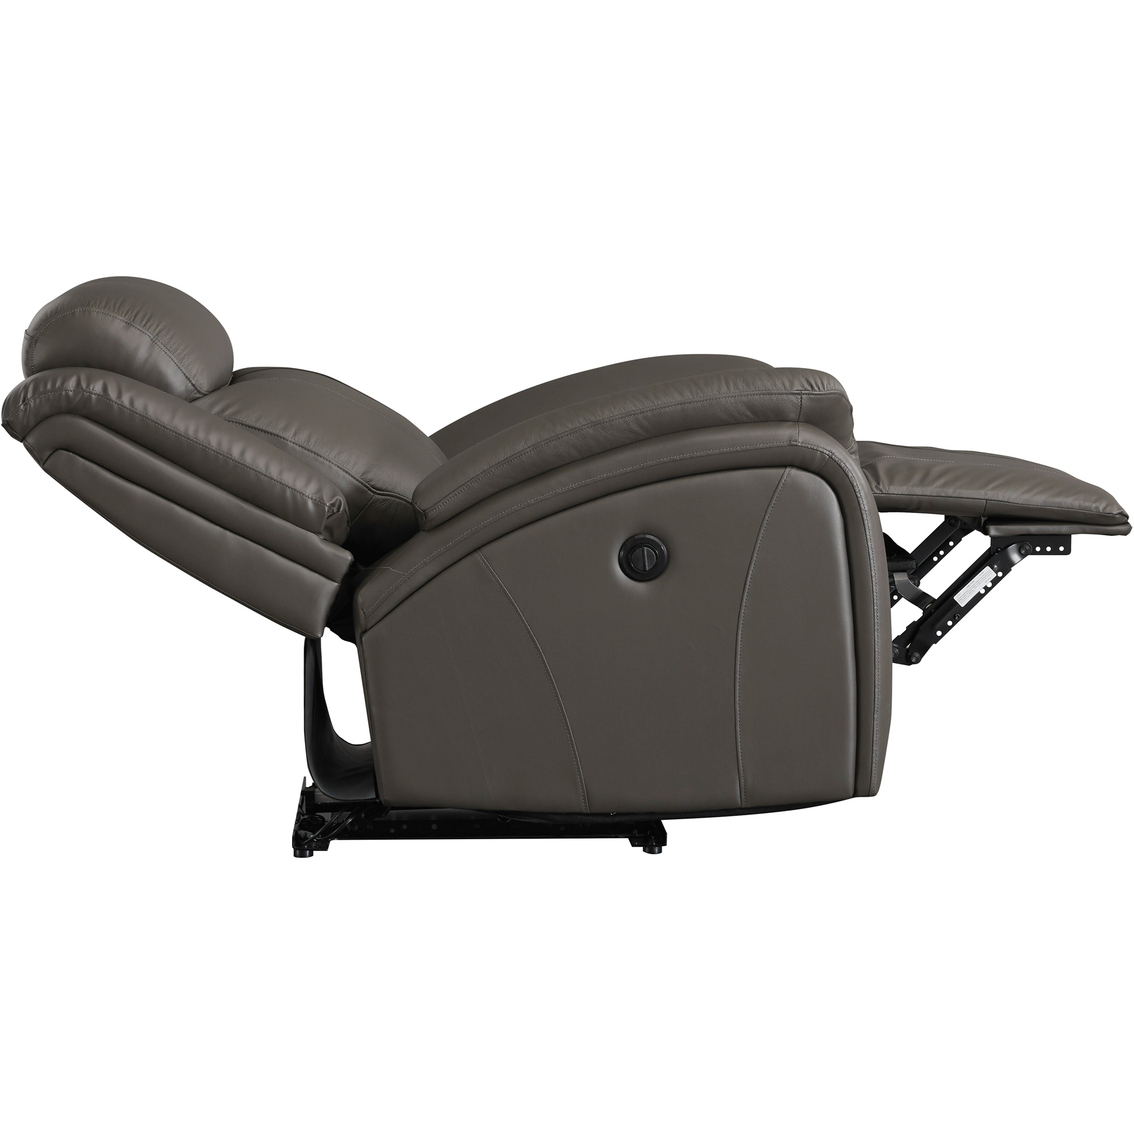 Signature Design by Ashley Chasewood Power Recliner - Image 5 of 9